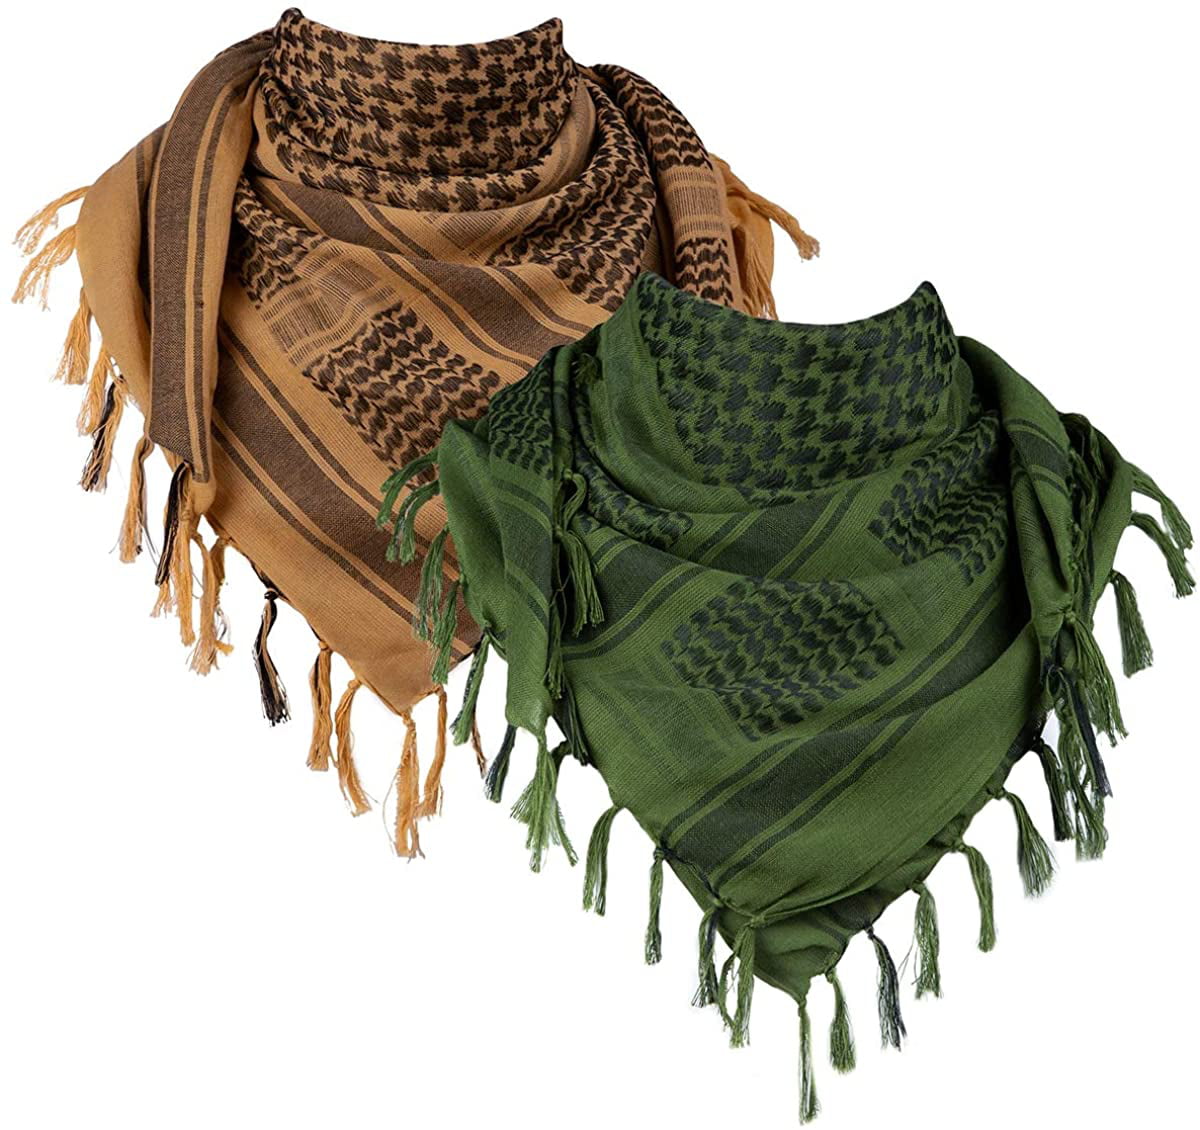 Winter Designer Shemagh Scarf Luxury Quality Thick Woven Arab Military Grade New 